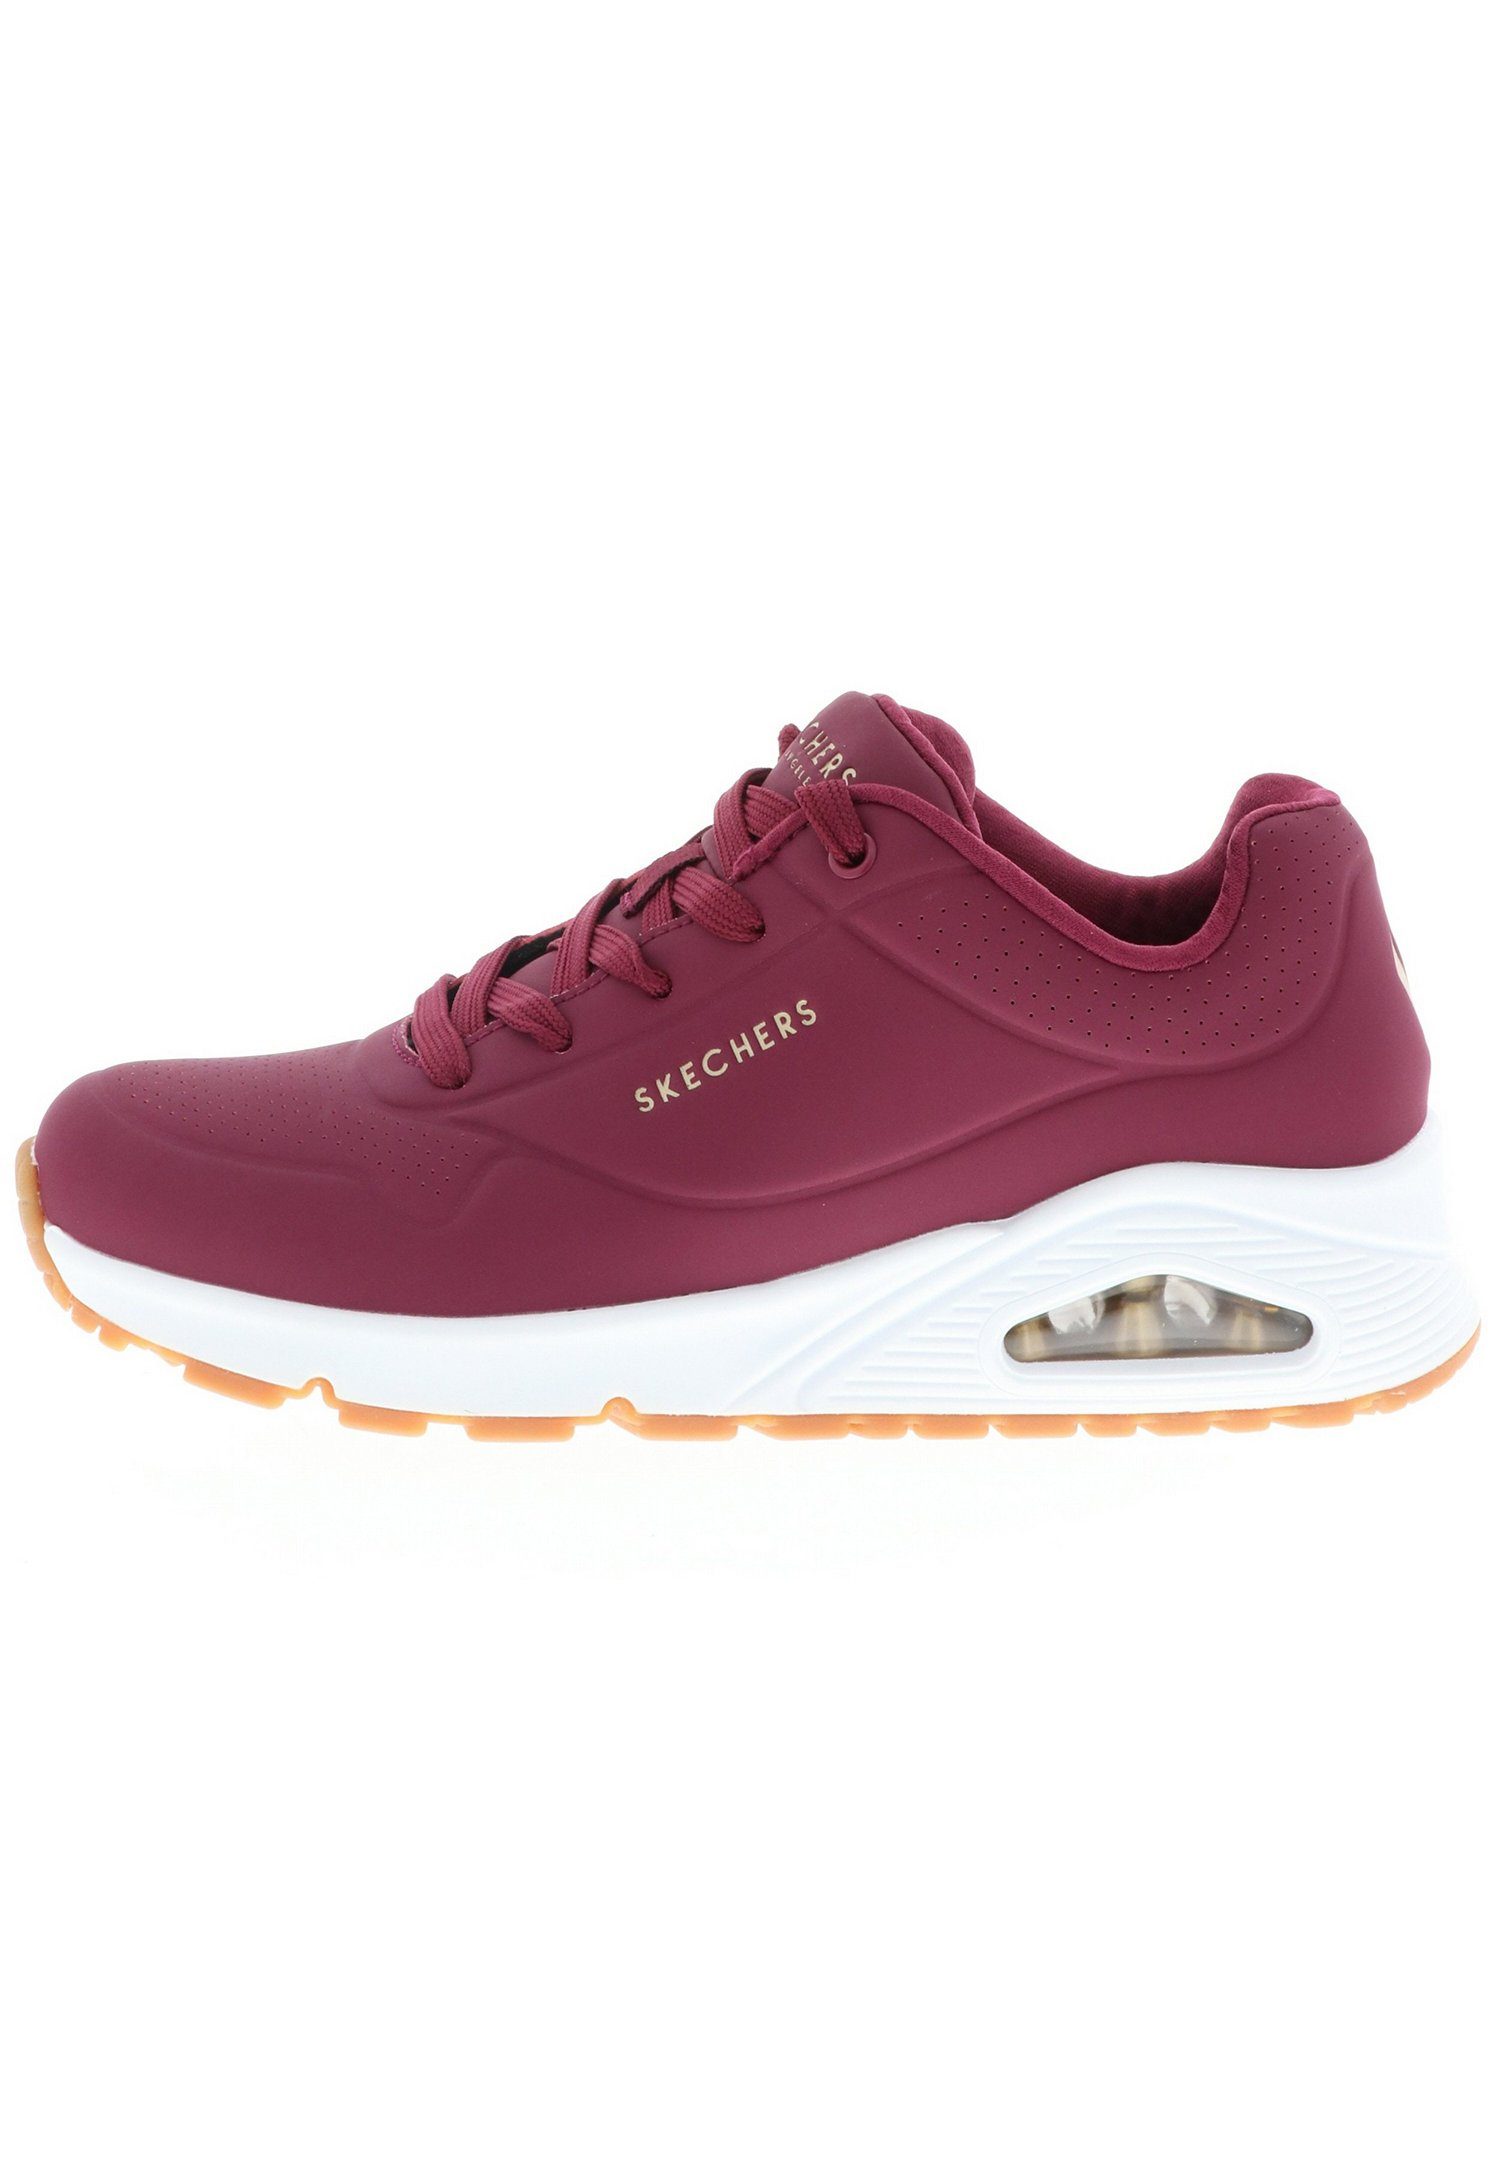 AIR ON Sneaker Uno Skechers STAND -